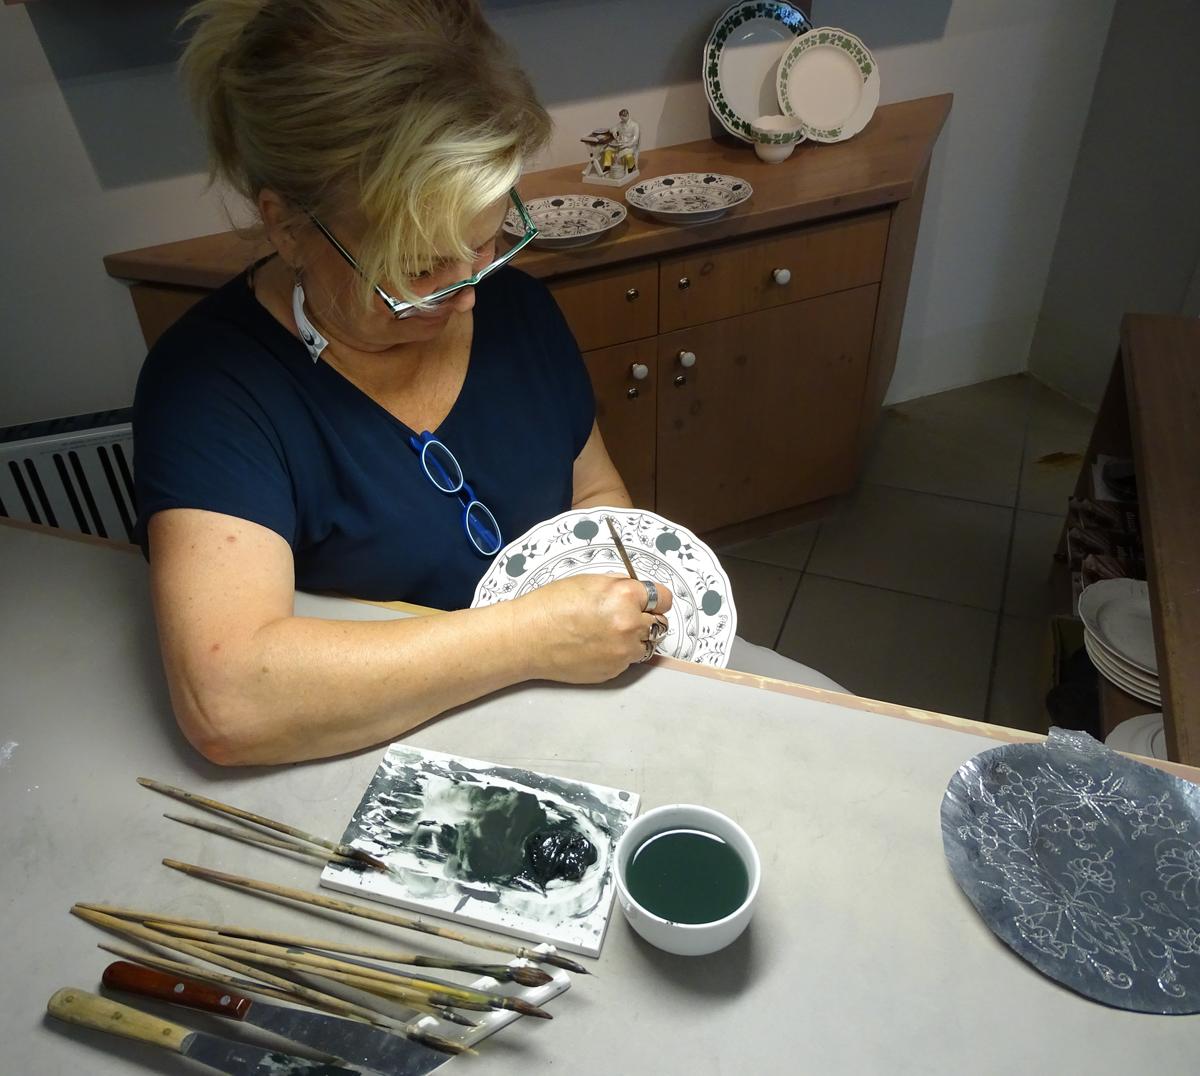 A hand-painting demonstration at the Meissen Porcelain Manufactory. (John M. Smith)